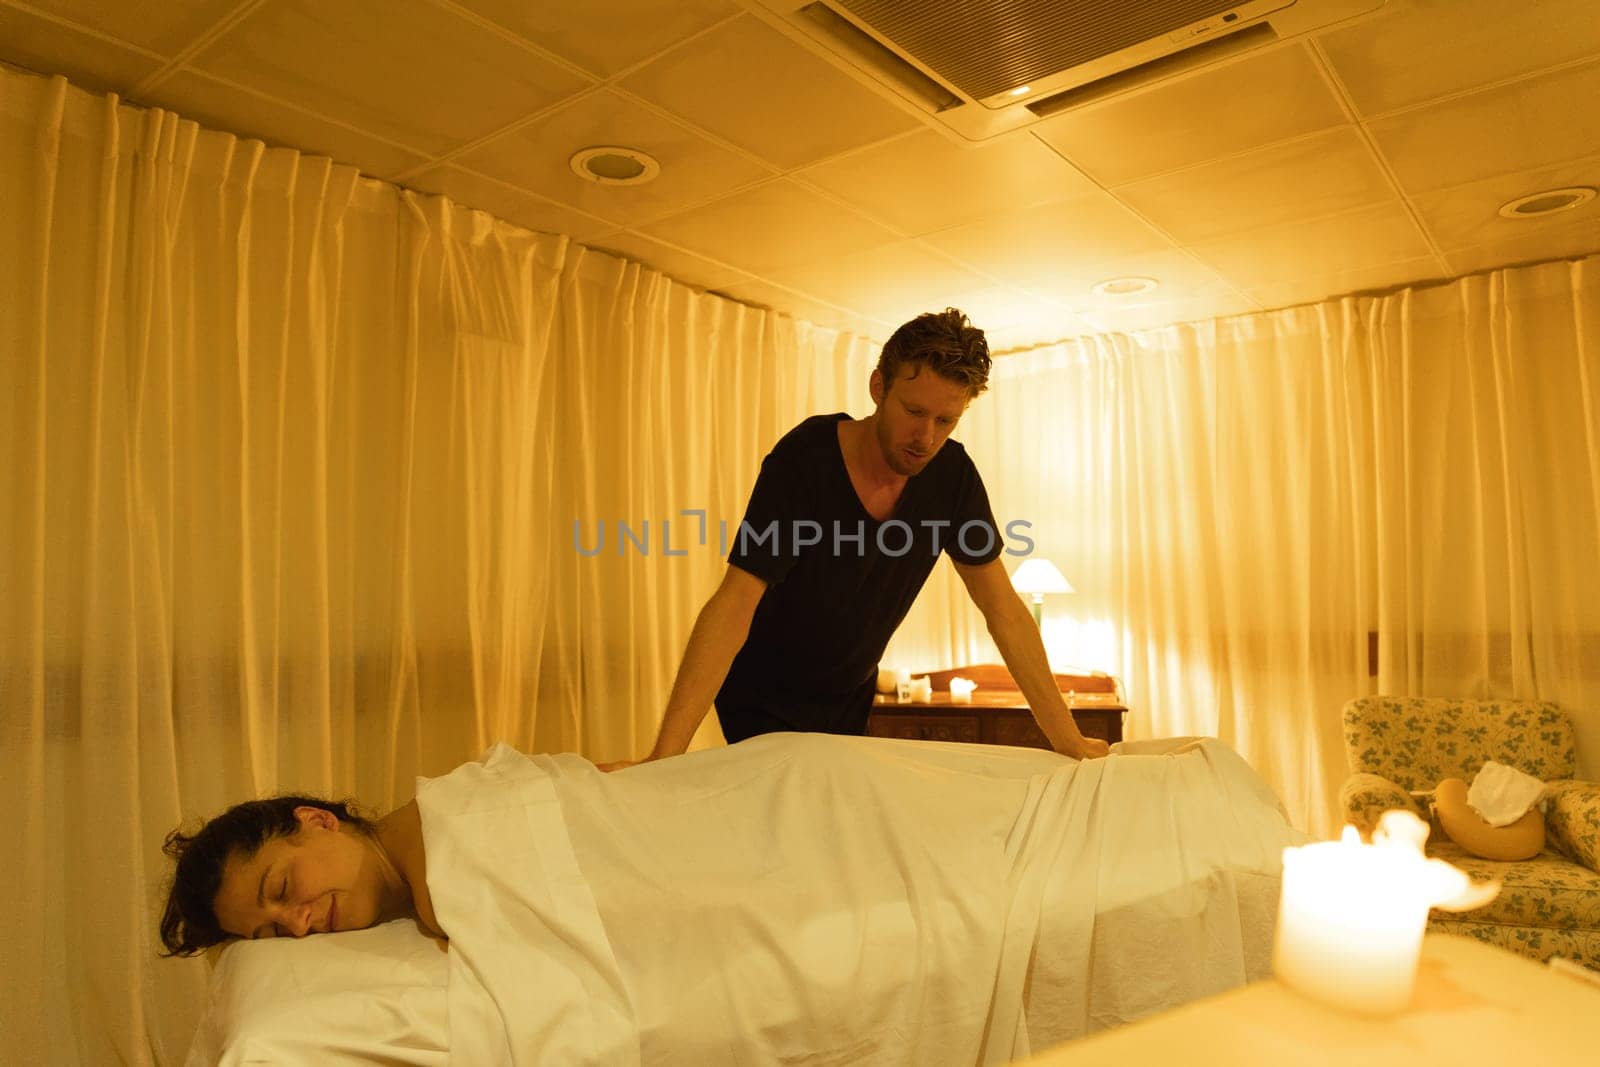 Massage session - master relaxes the body of the female client through a white cloth by Studia72